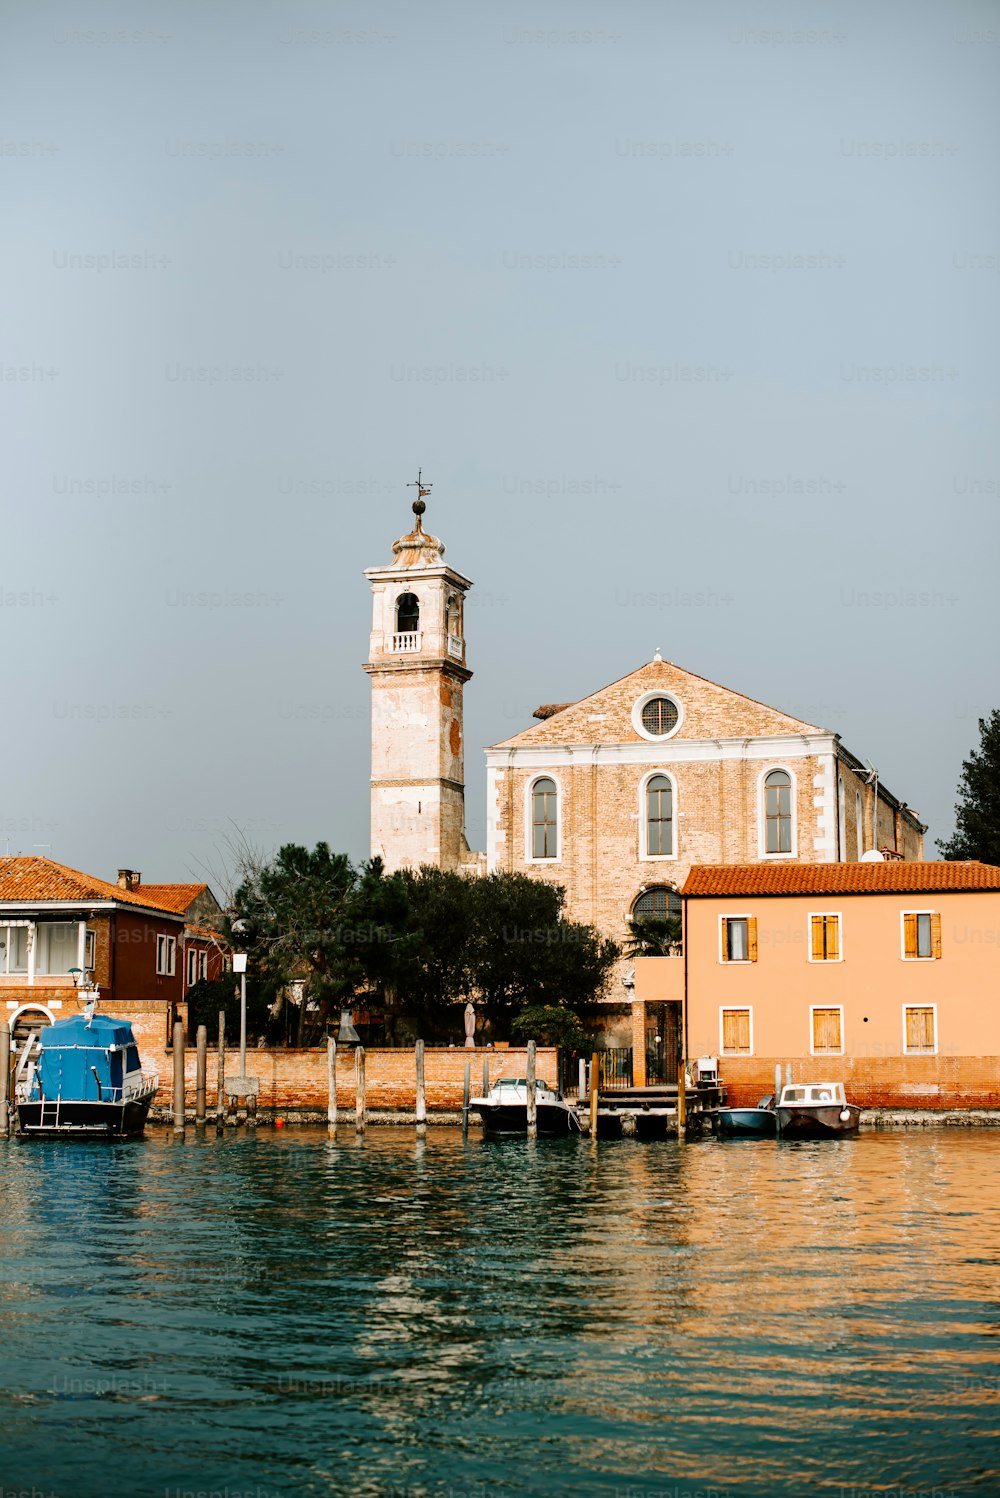 a church on the shore of a body of water